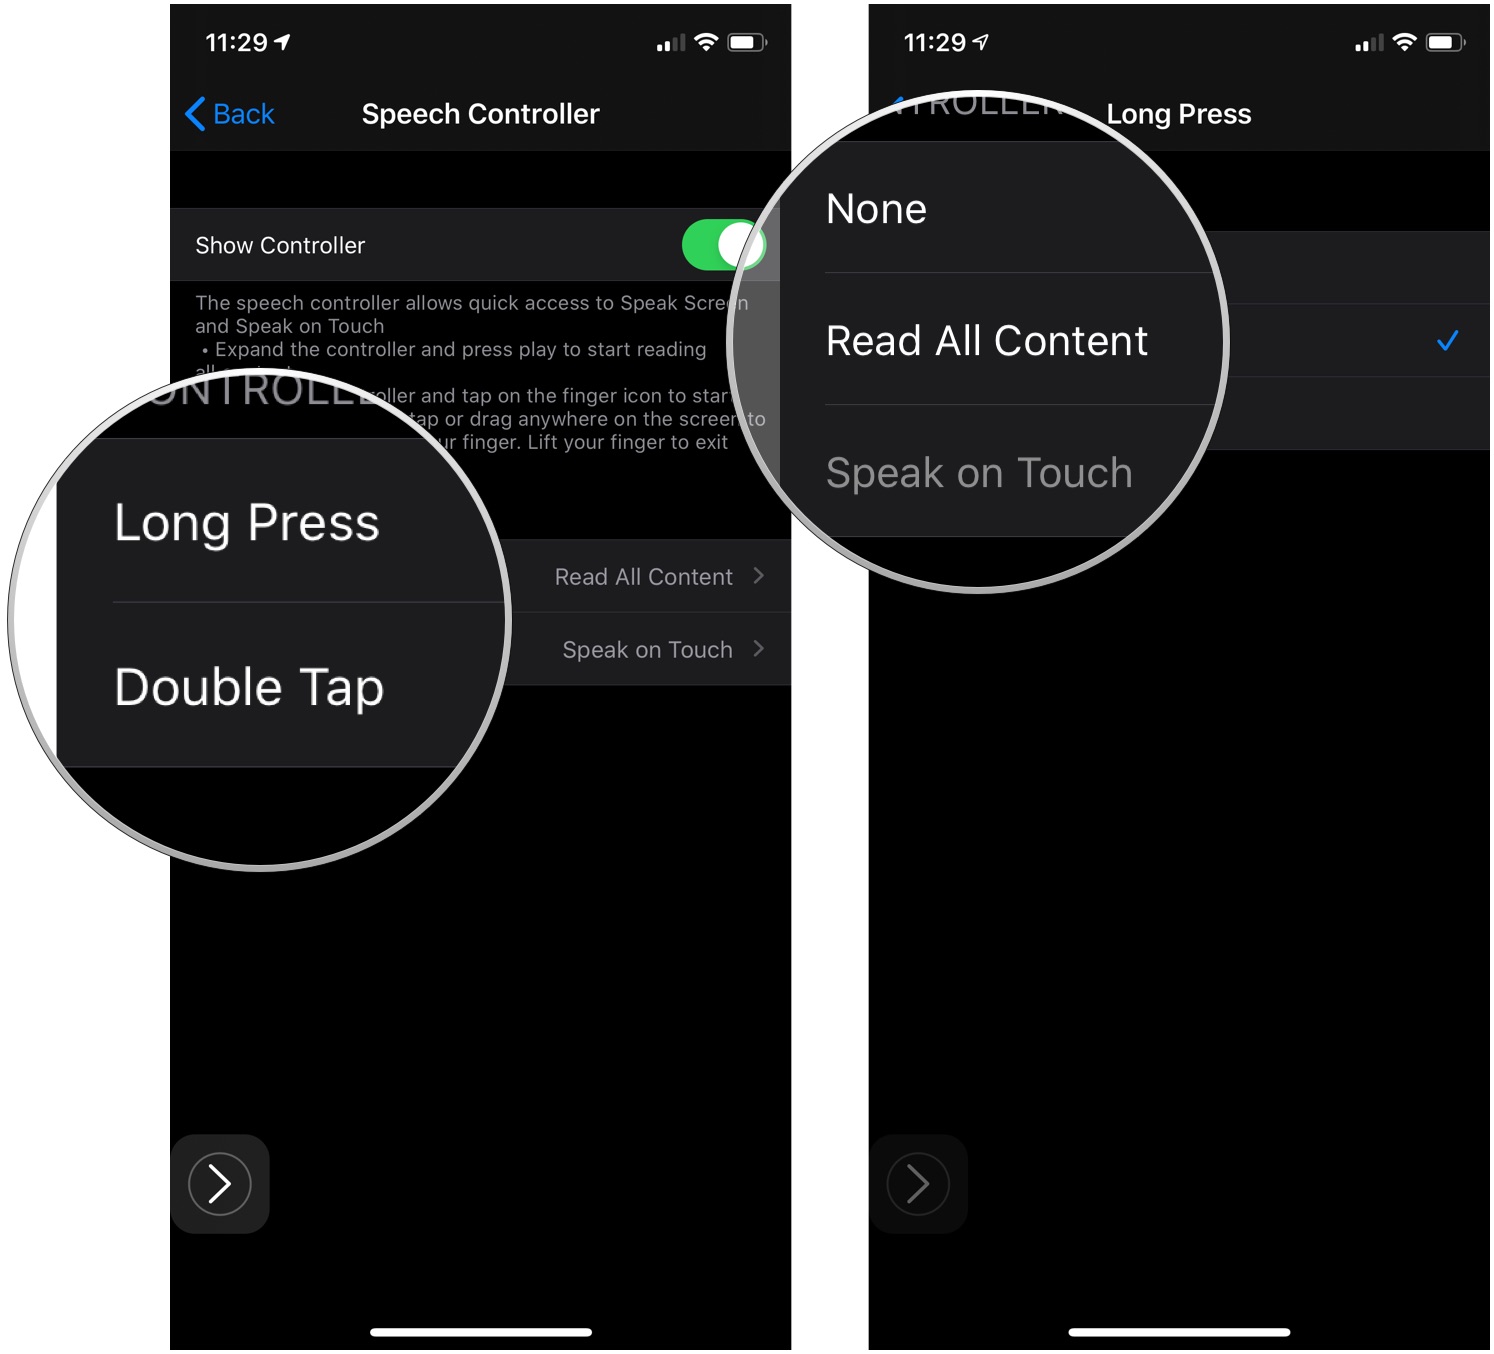 Enable Speech Controller, showing how to tap Long Press or Double Tap, then tap the None, Read All Content, or Speak on Touch options